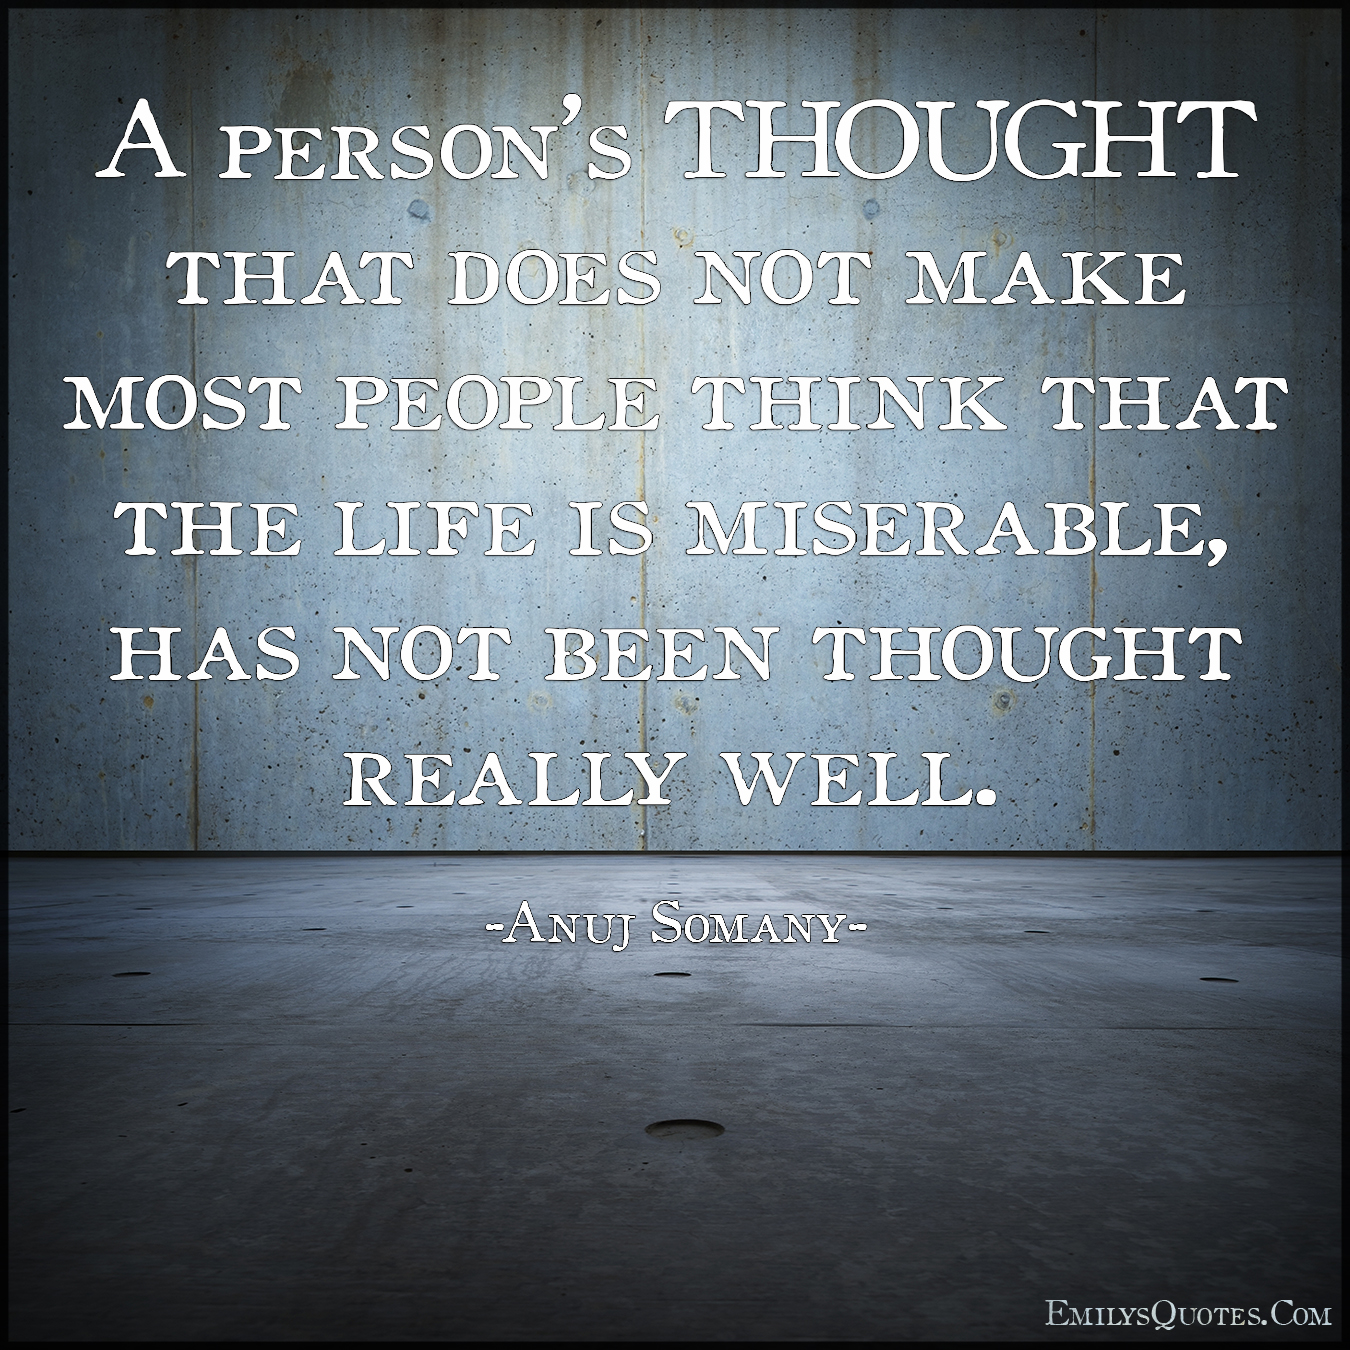 A person’s THOUGHT that does not make most people think that the life is miserable